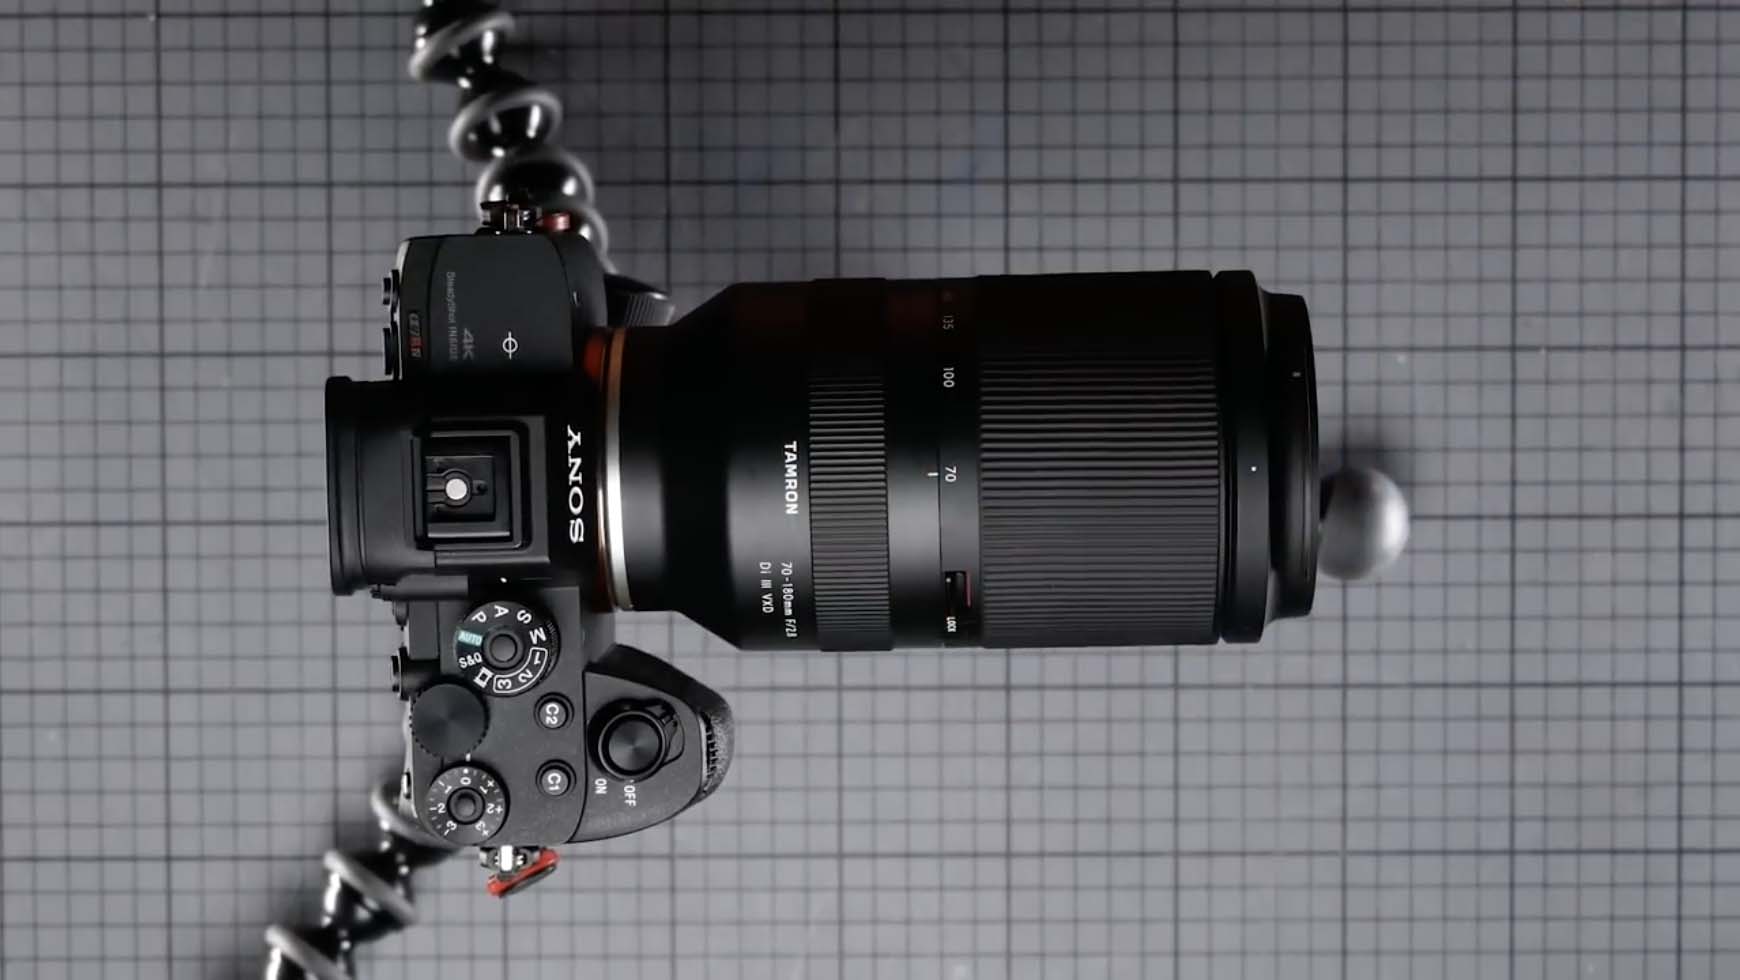 Tamron 70-180mm f/2.8 Di III VXD Review - Faster, Lighter, Cheaper, and